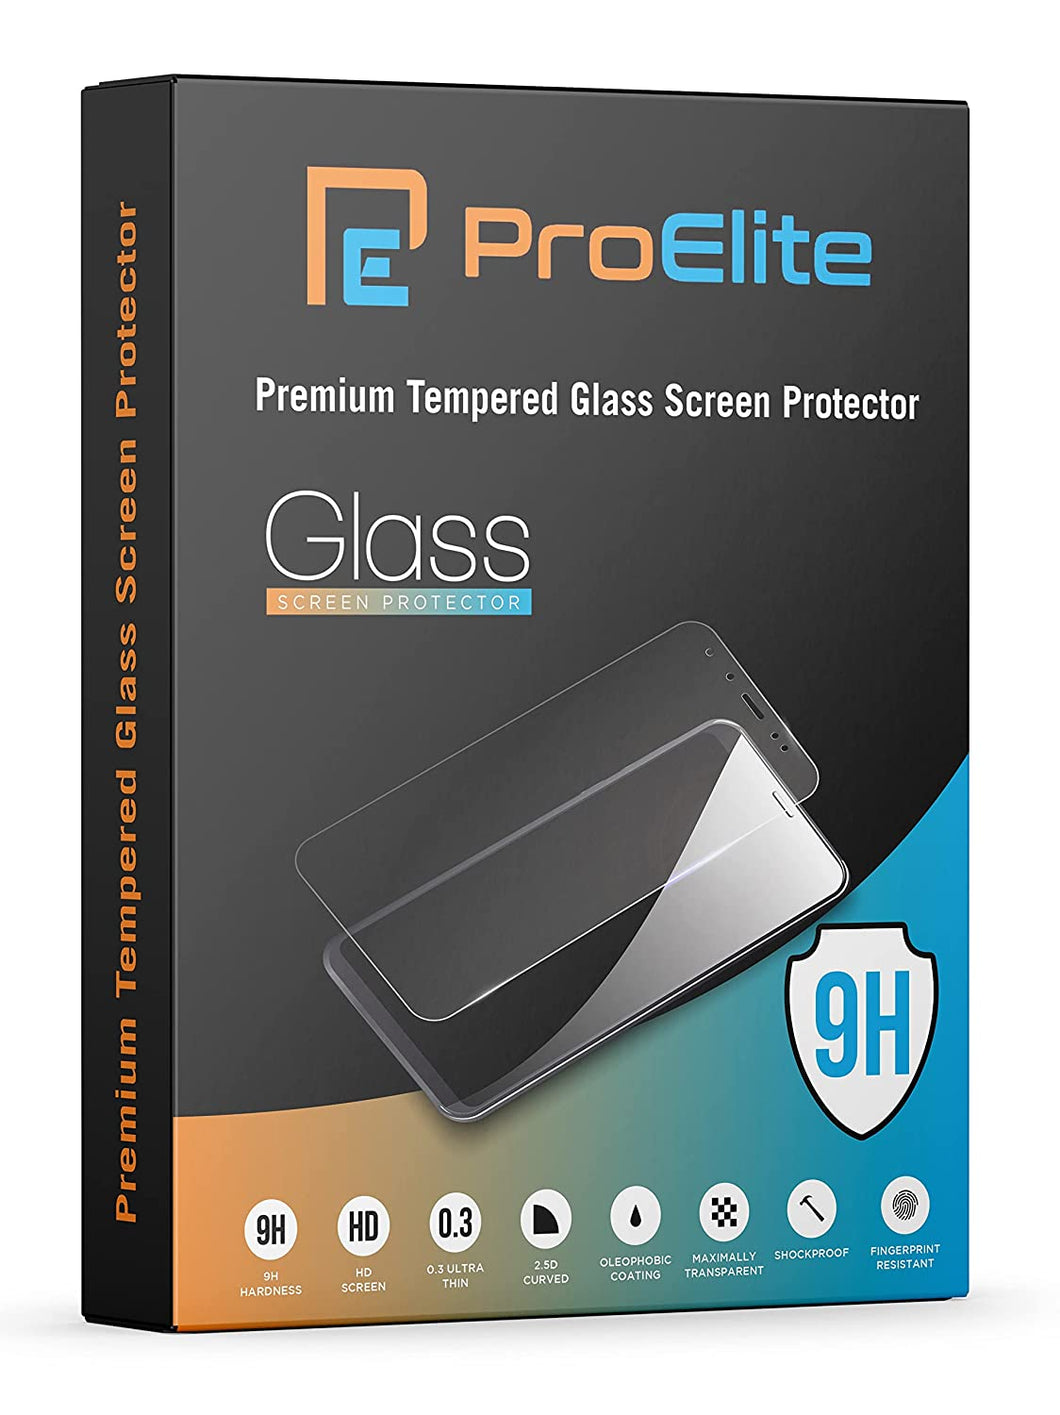 [2-Pack] ProElite Premium Tempered Glass Screen Protector for Lenovo Tab M10 FHD 3rd Gen 10.1 inch